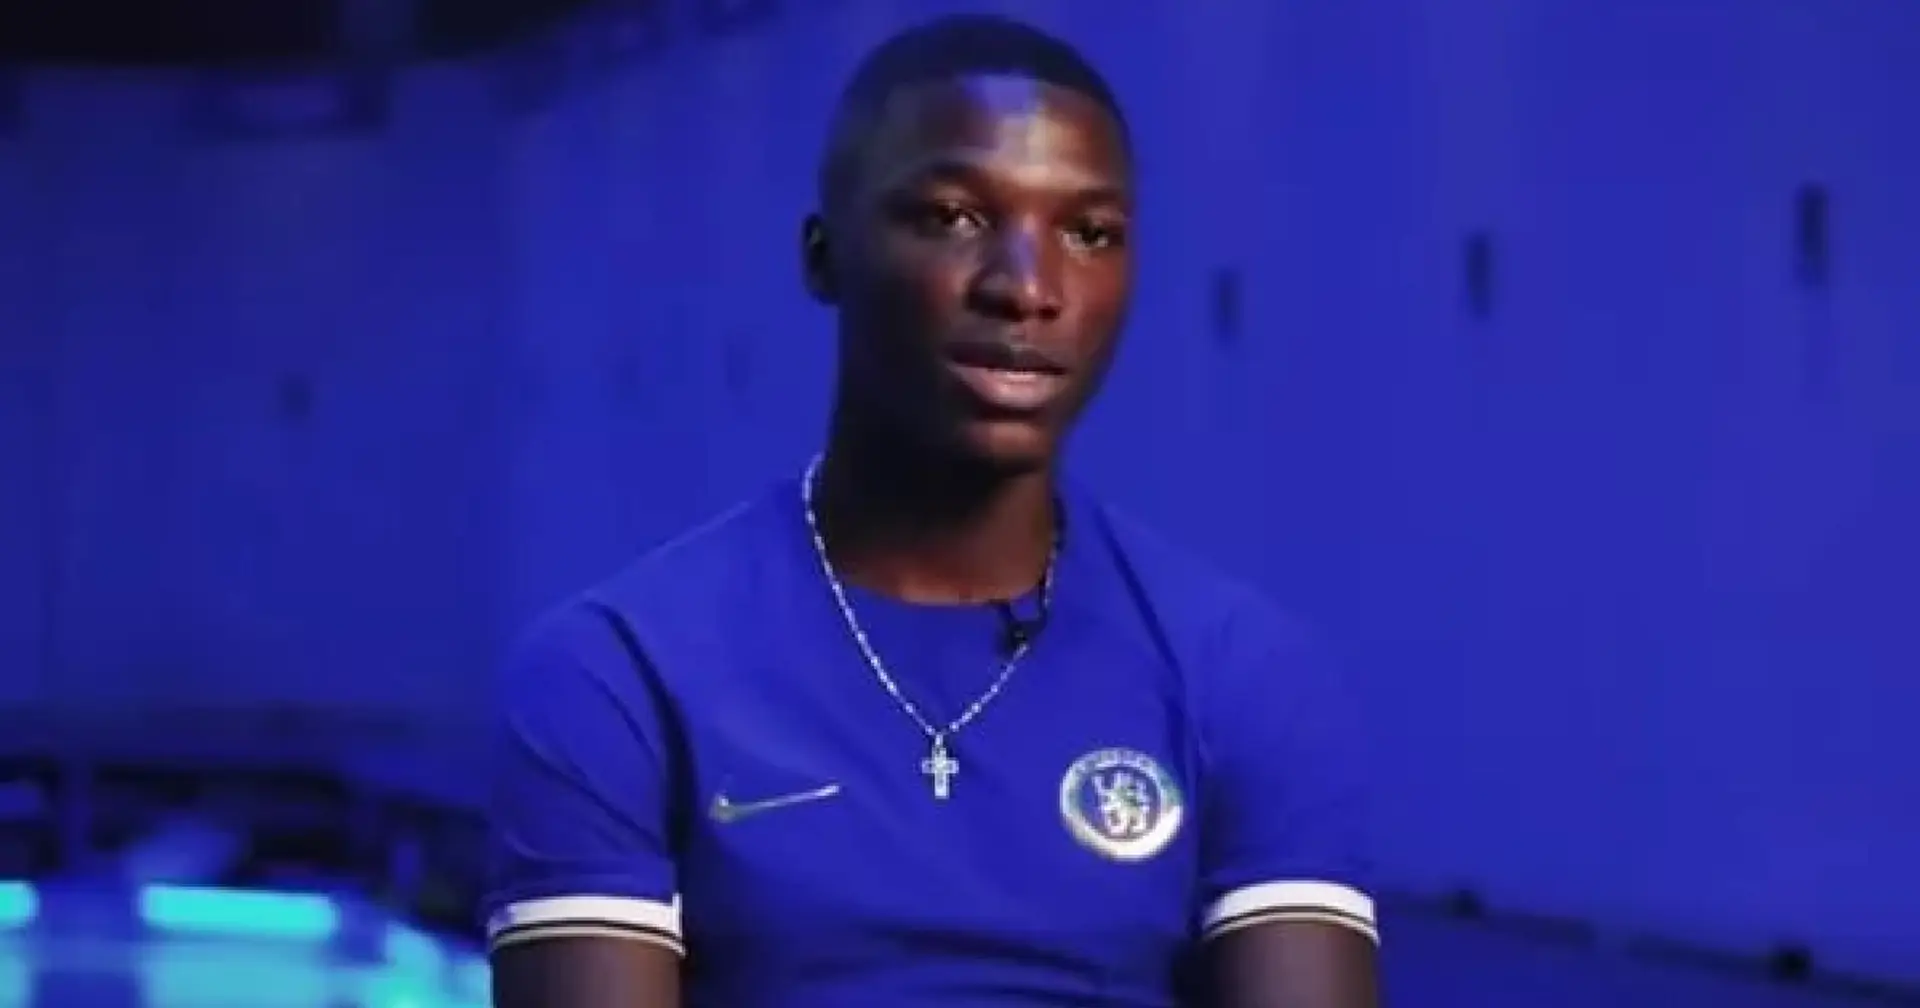 Caicedo makes promise to Chelsea fans & 2 more big stories you might've missed